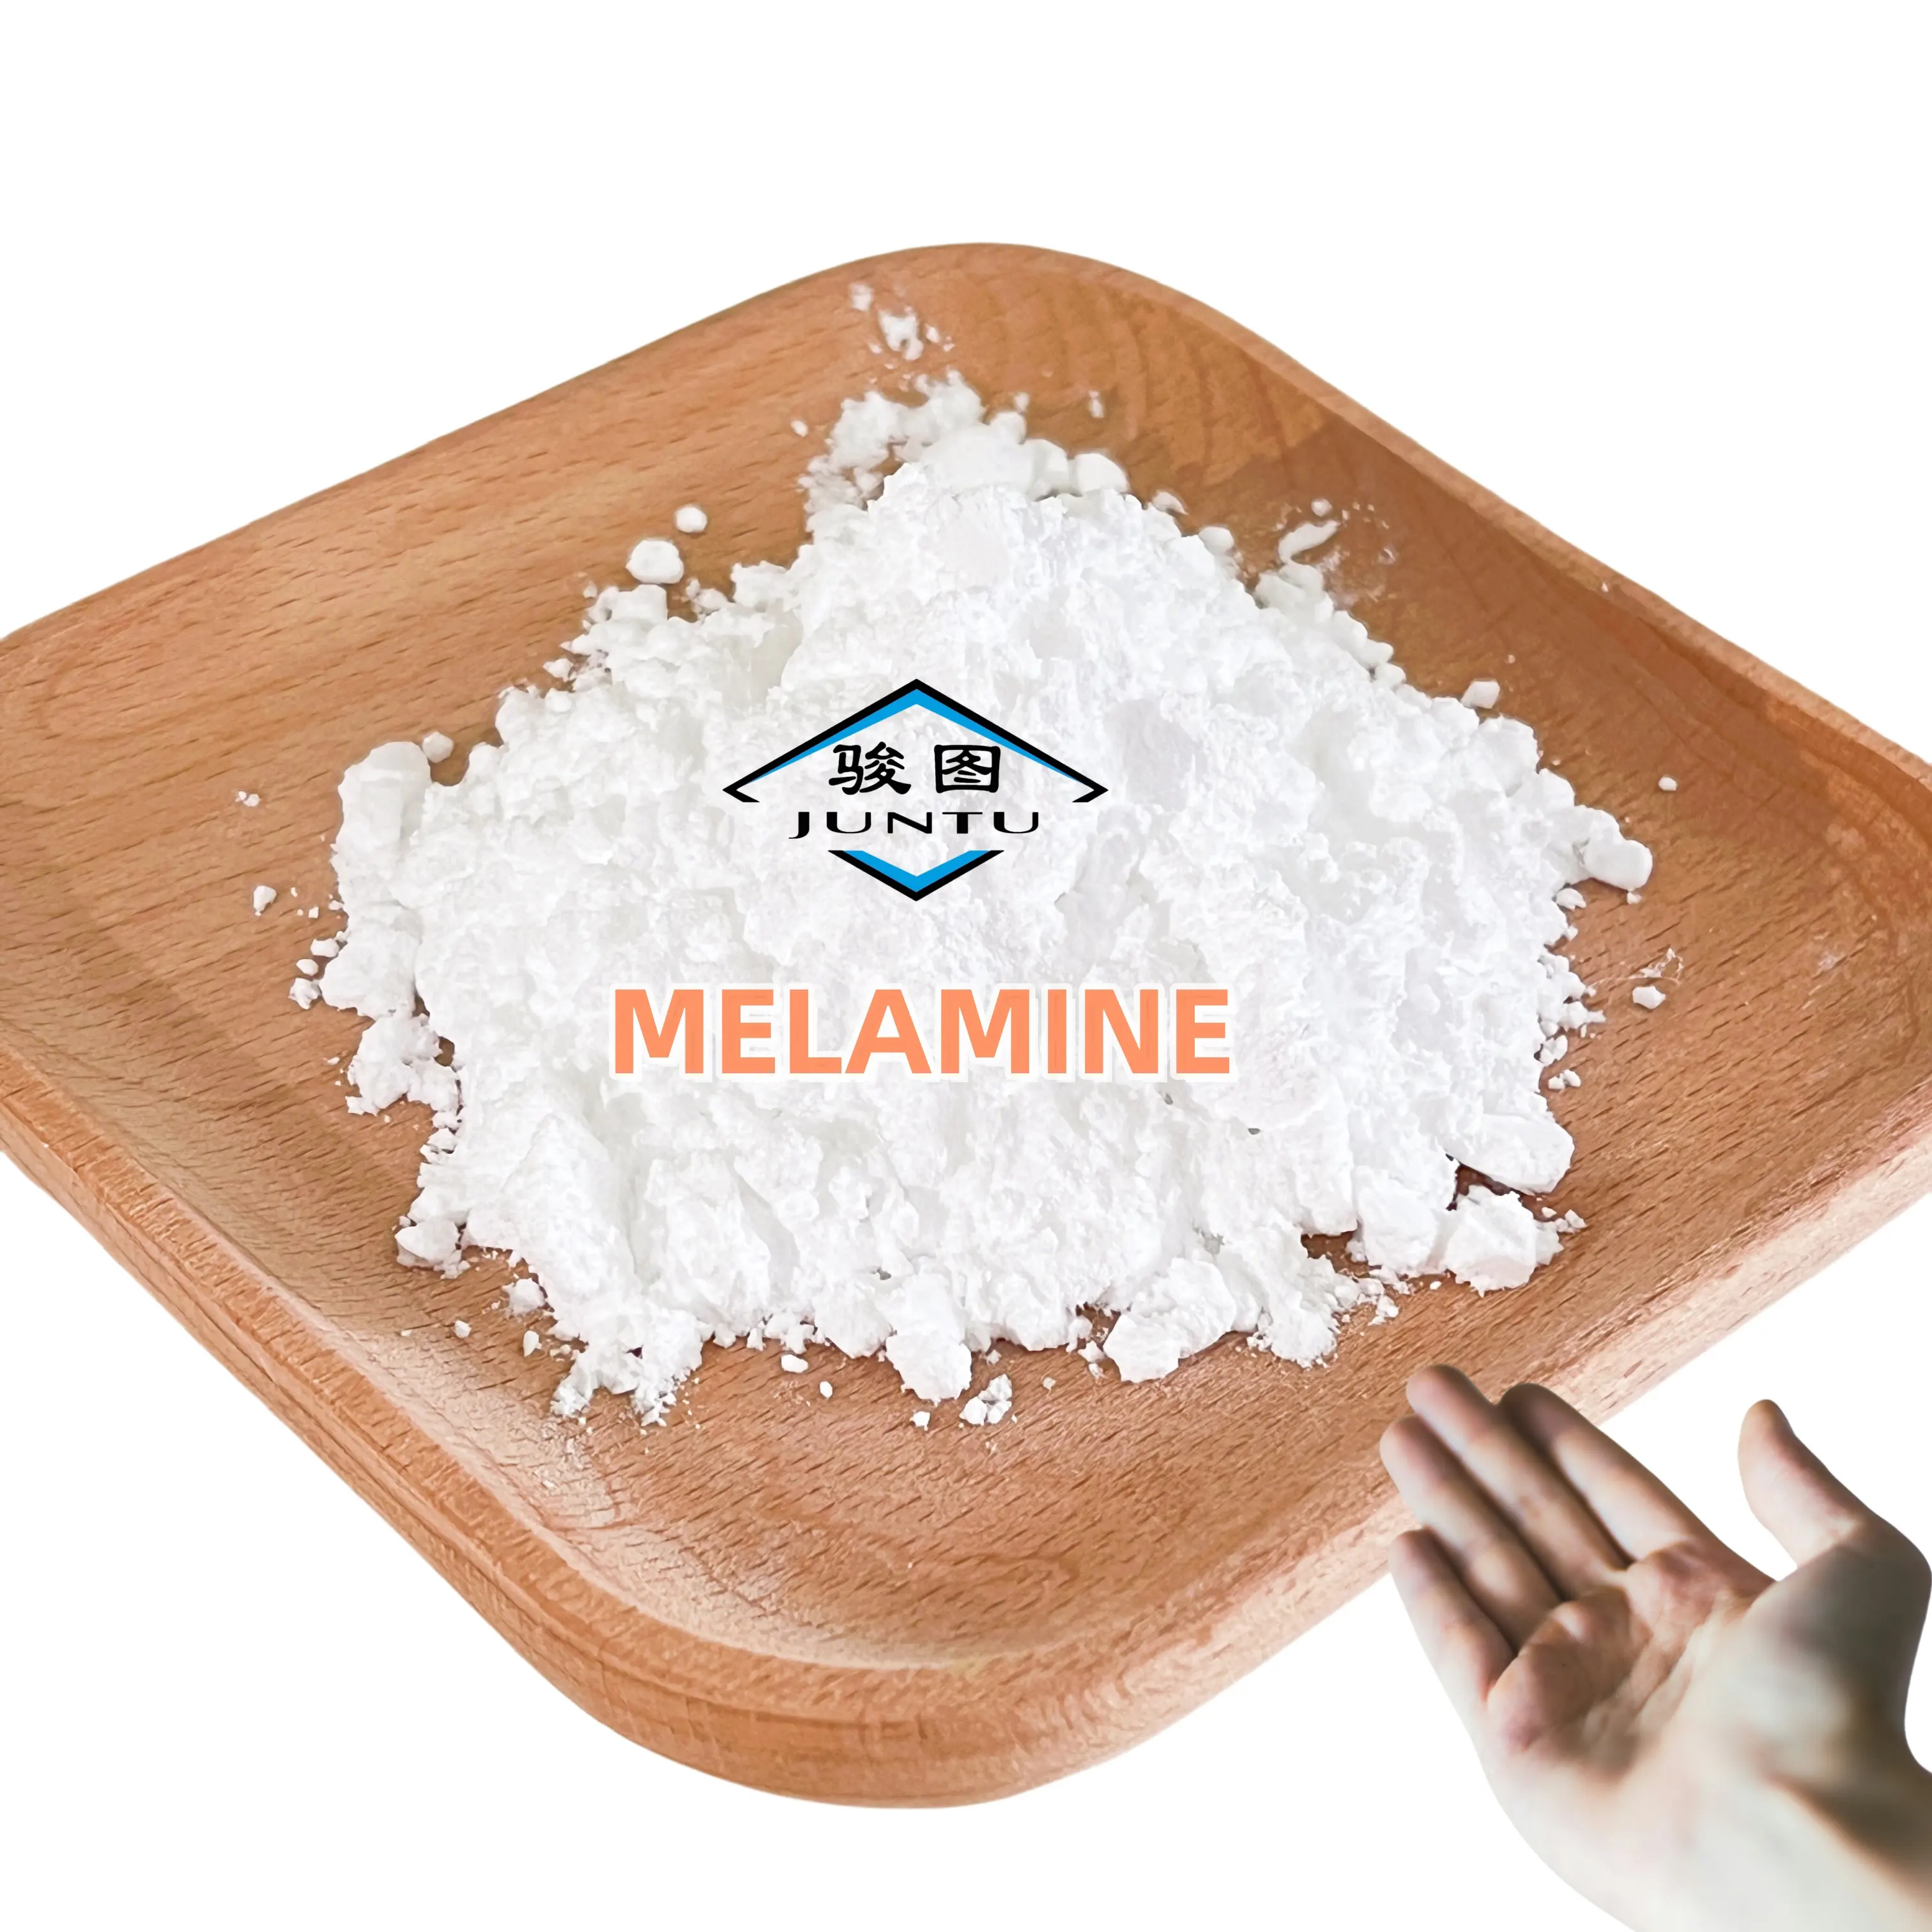 Industrial Grade Melamine Amine 99.9% Purity Factory Direct Sale with Excellent Products Hot Sale Sample Service Available